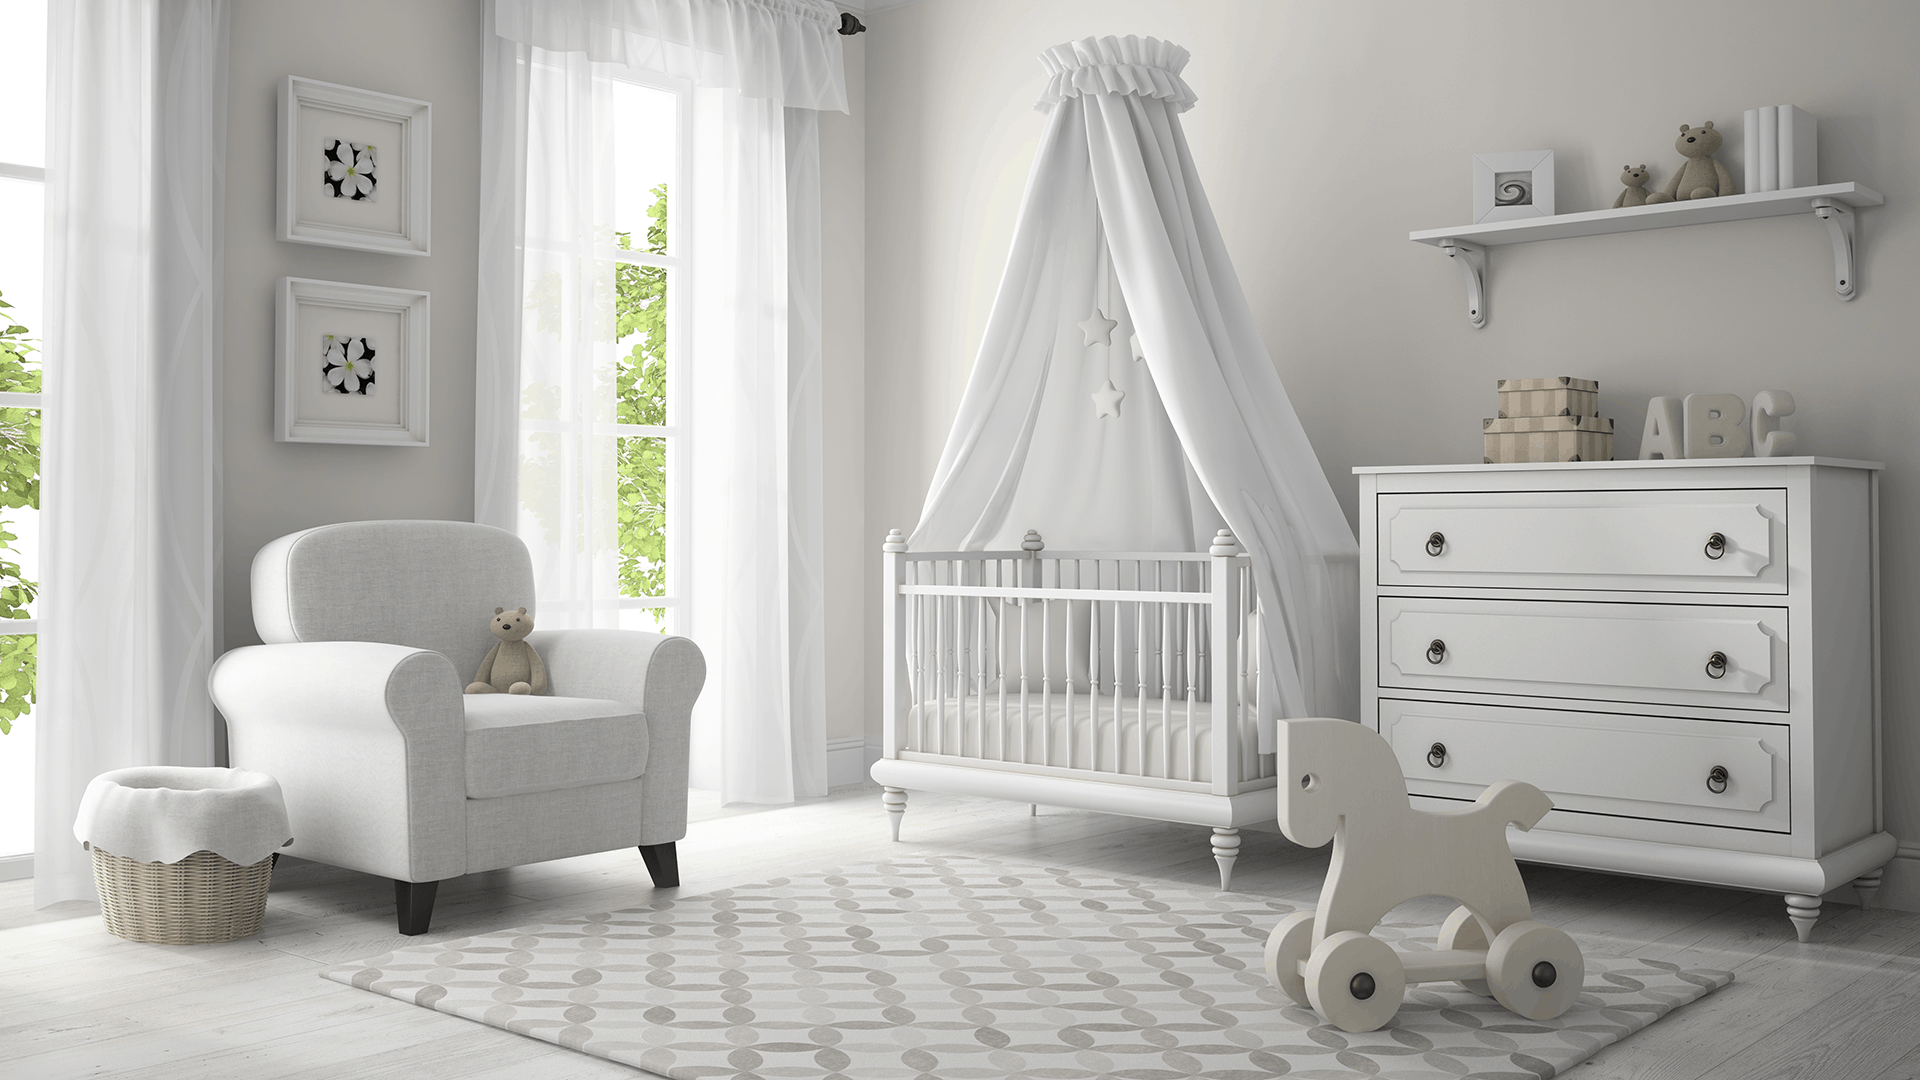 Bedroom Decorating Ideas For Babies